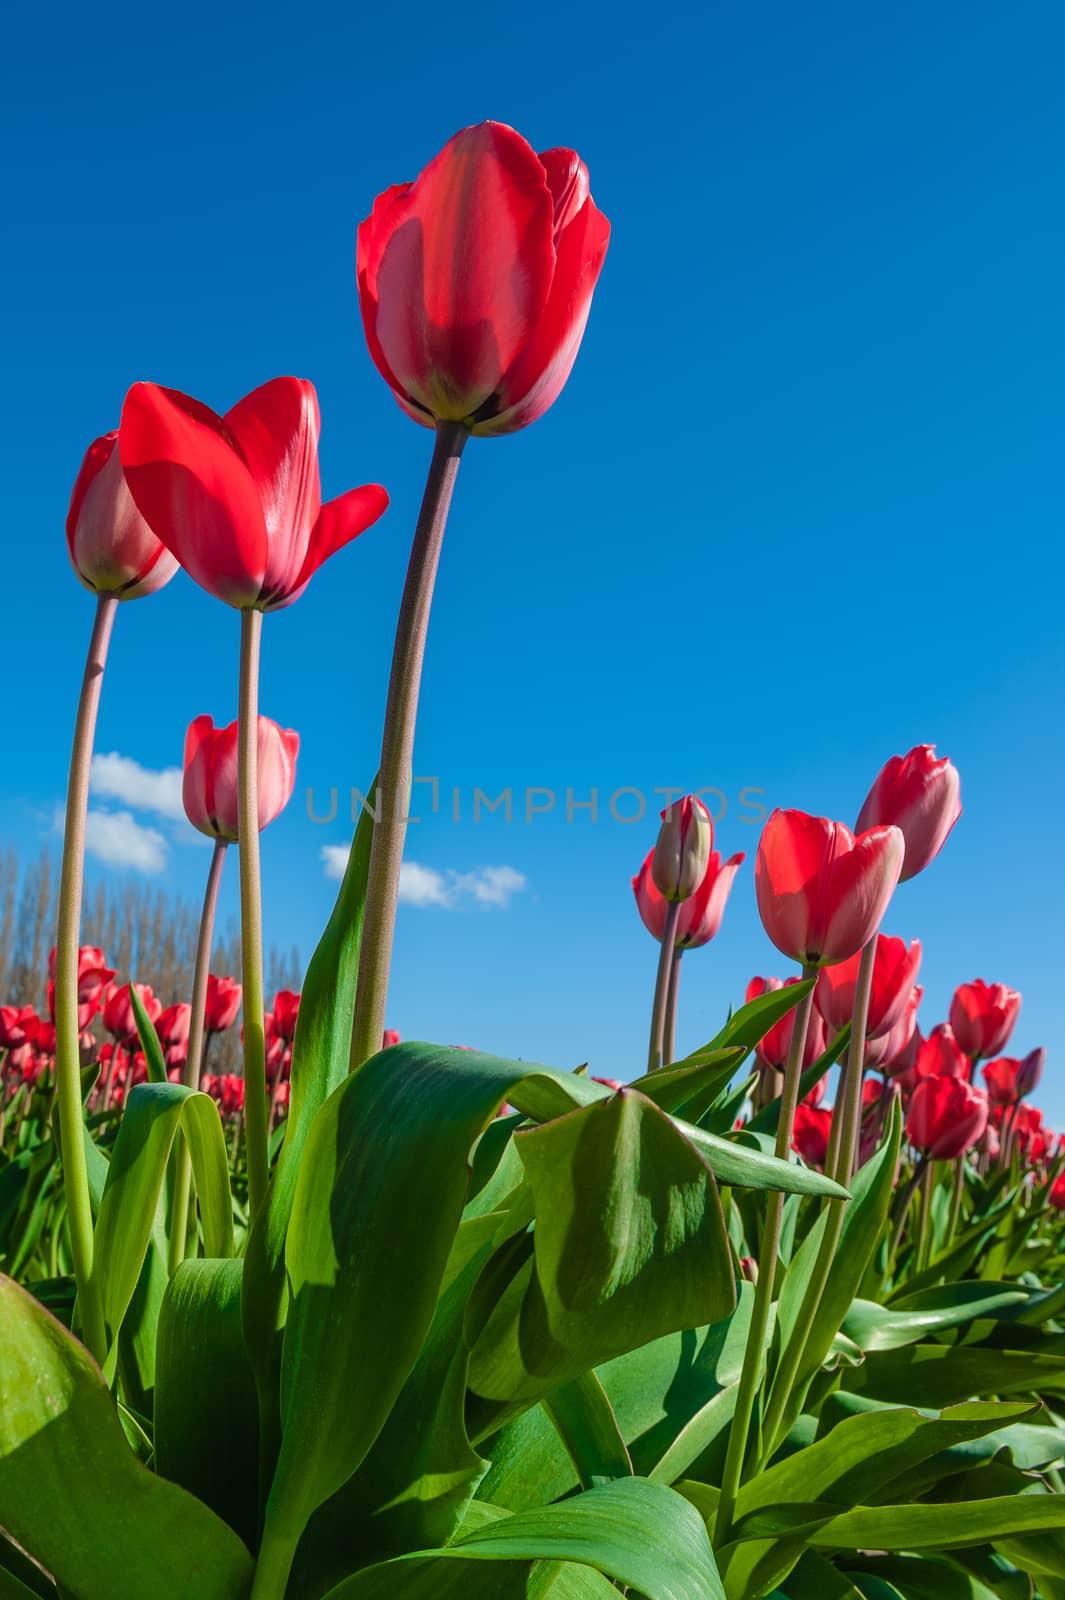 Red tulips against blue sky at the Skagit Tulip Festival by chentim